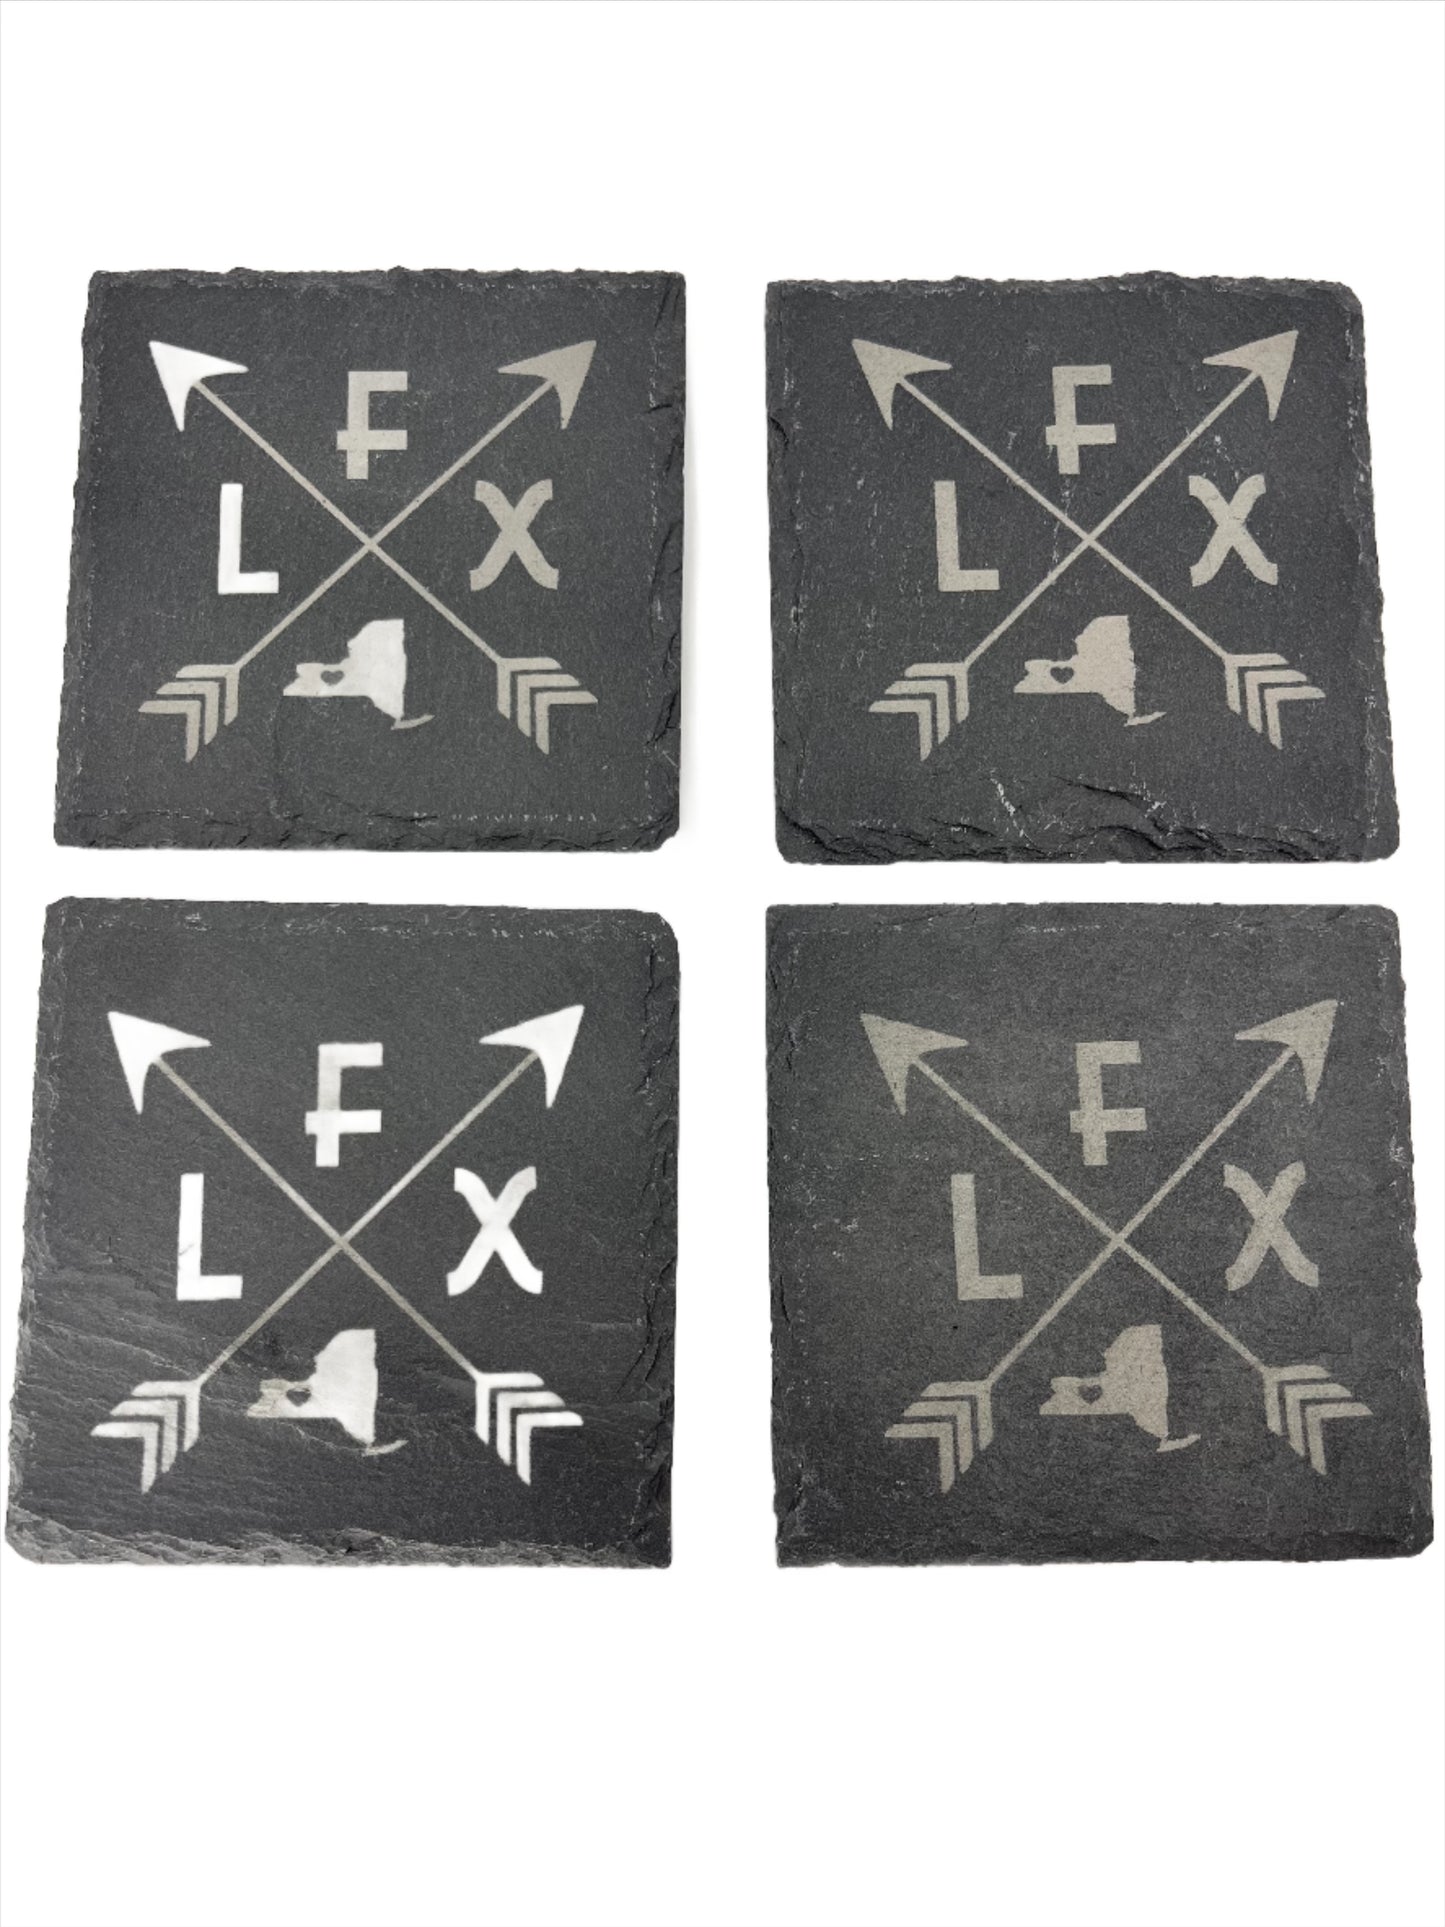 FLX Arrows Etched Slate Coasters - Set of 4